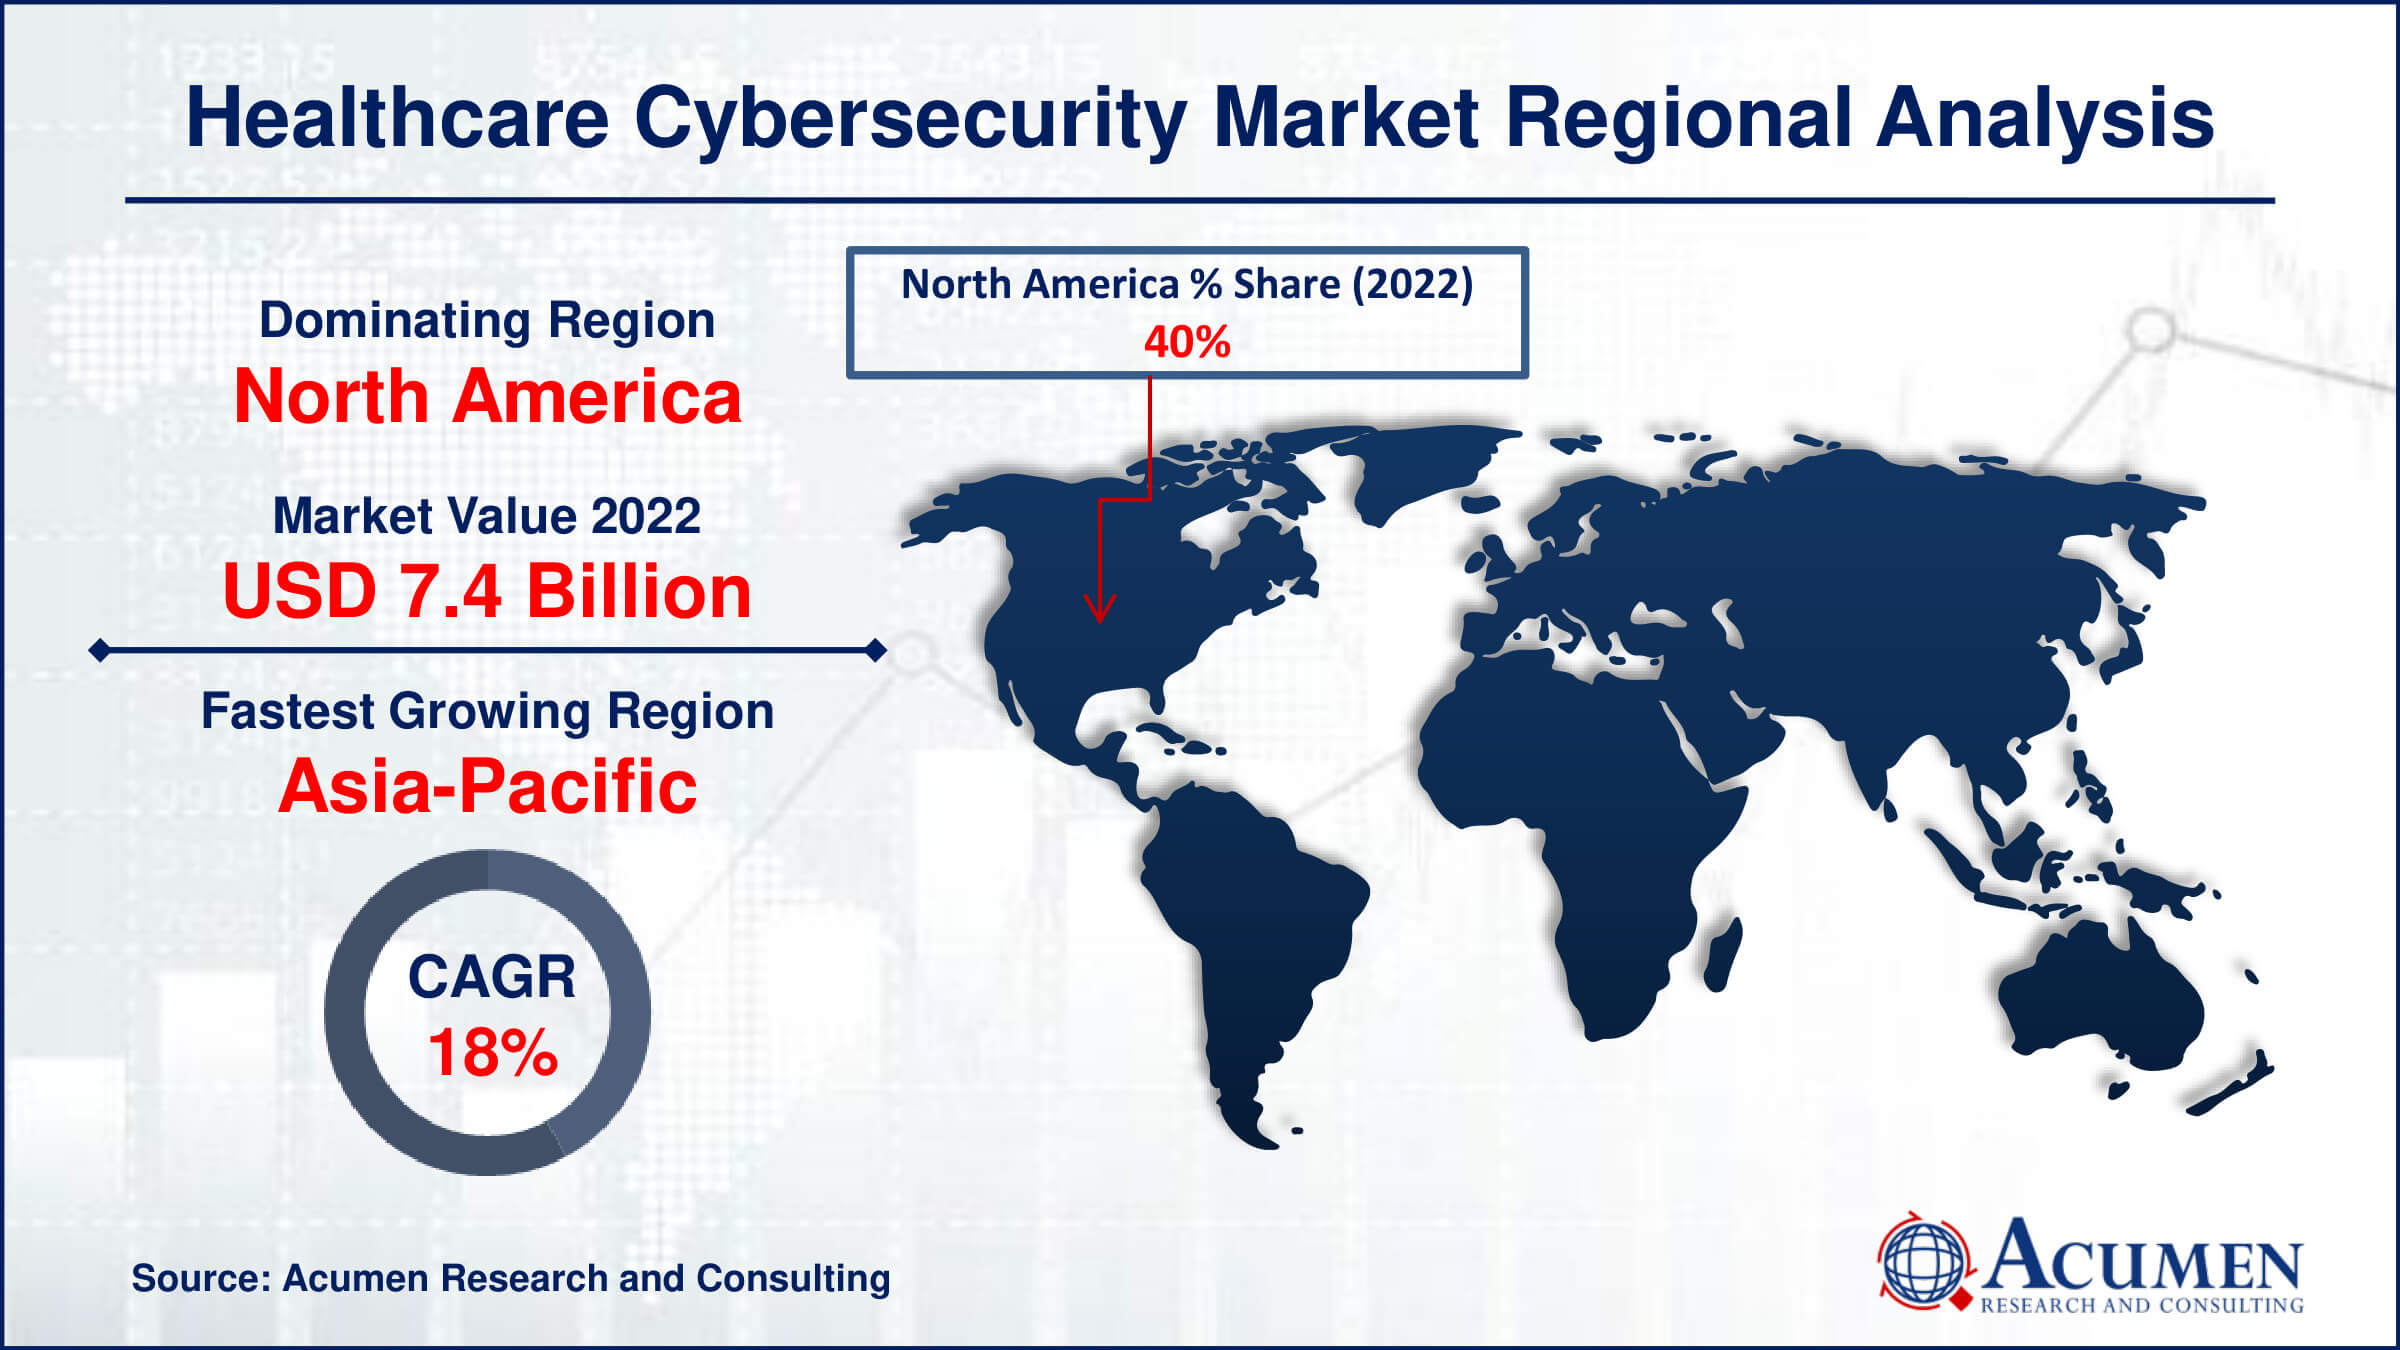 Healthcare Cyber Security Market Drivers